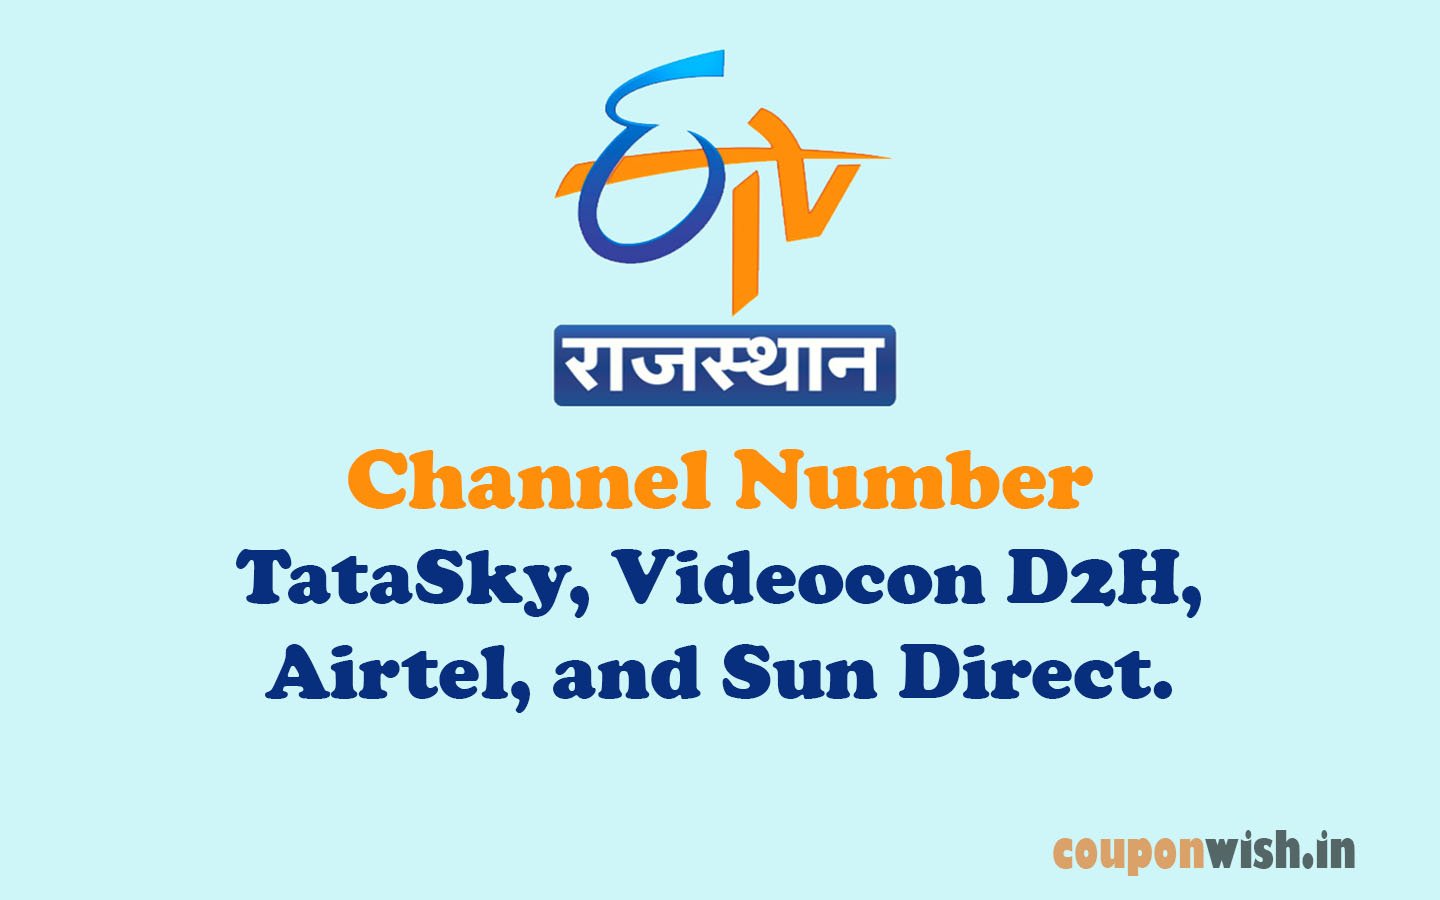 ETV Rajasthan Channel Number on TataSky, Videocon D2H, Airtel, and Sun Direct